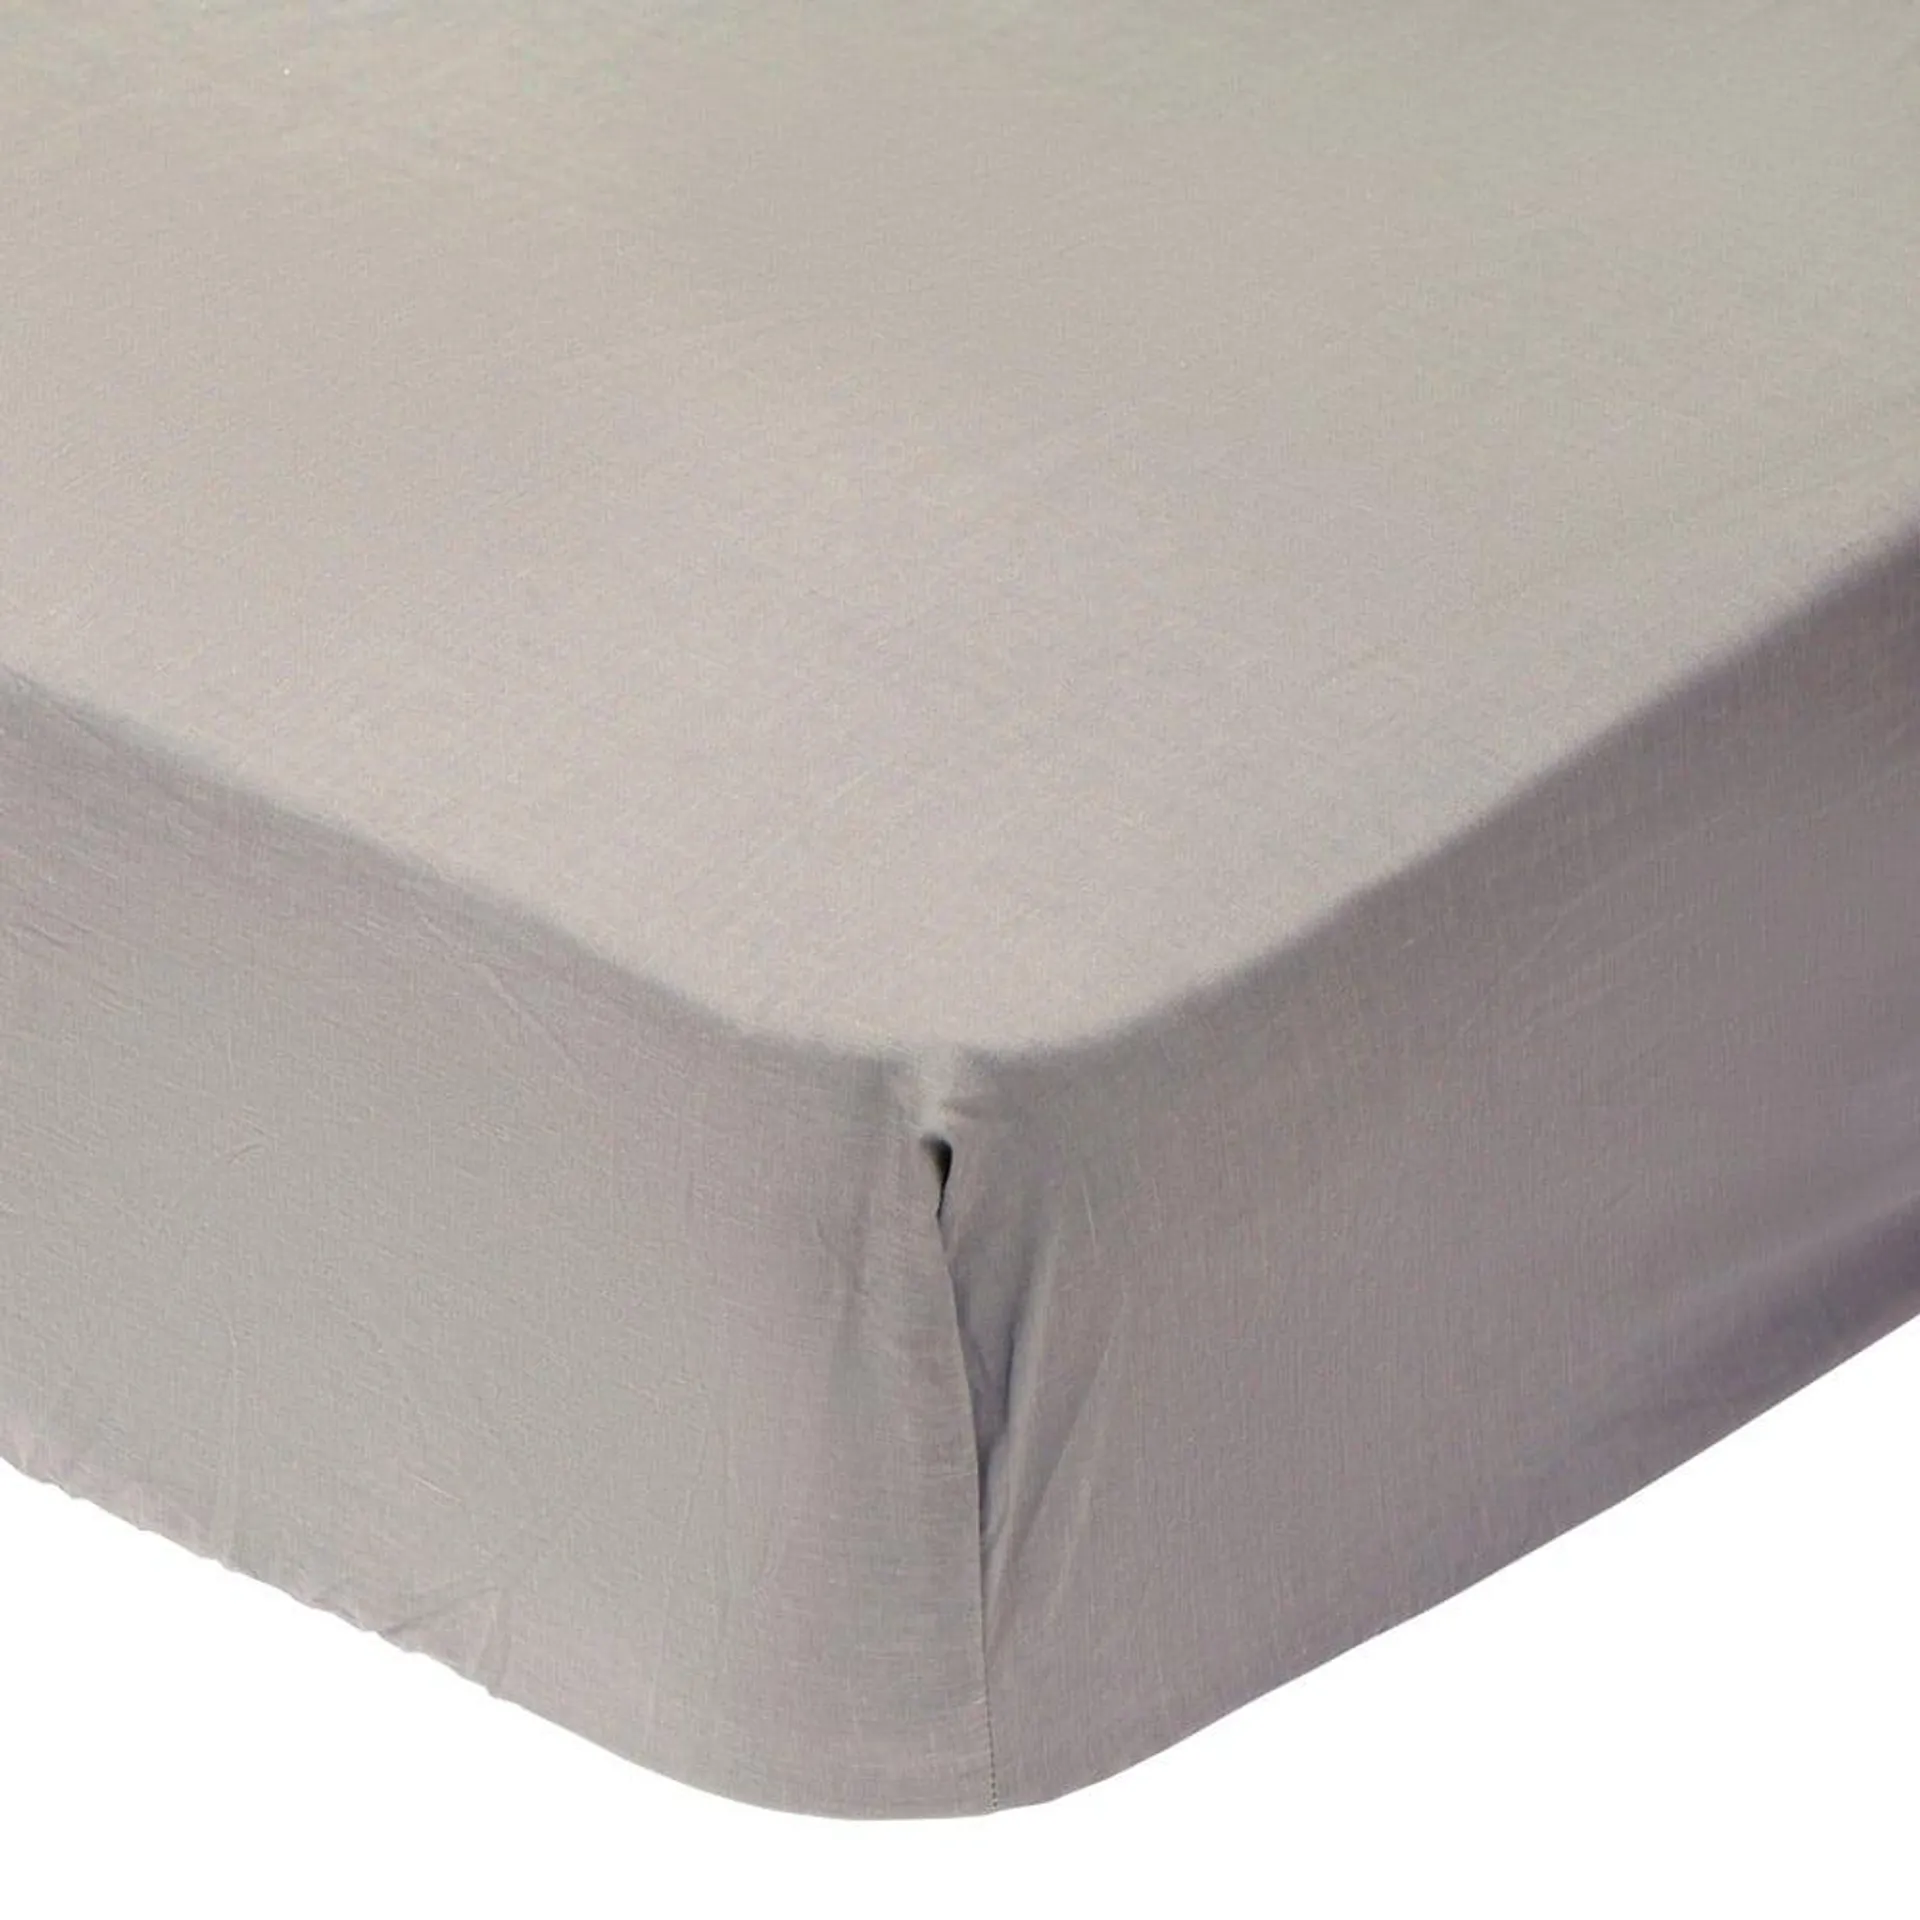 Wilko Best Double Porpoise 300 Thread Count Percale Fitted Bed Sheet